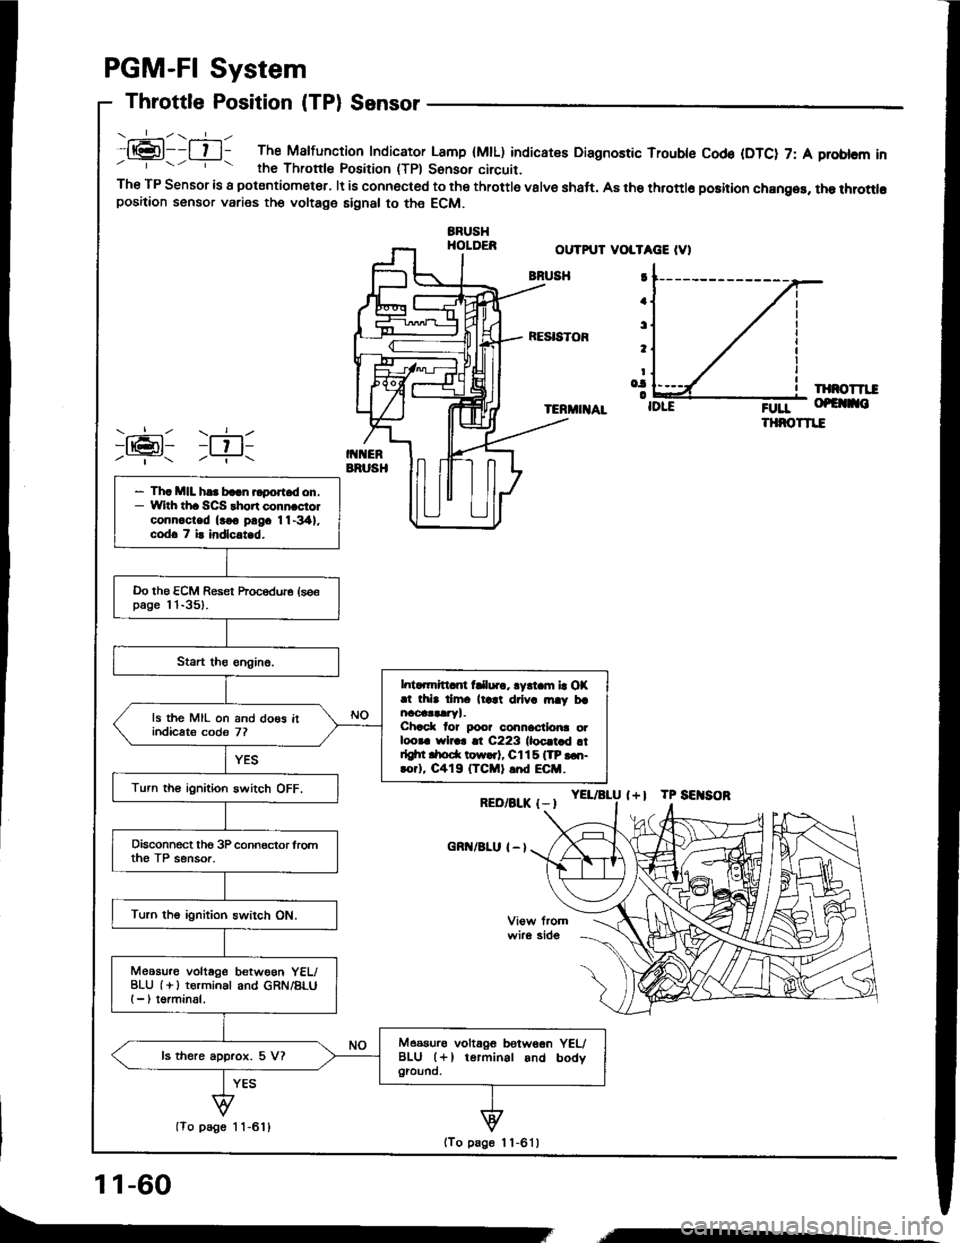 ACURA INTEGRA 1994  Service Repair Manual .:-\.-----ll@l--l t l- The Malfunction Indicator Lamp (MtL) indicatee Diagnostic Trouble Cod€ (DTC) 7: A problcm inrhe Thronle Position (TPl Sonsor circuit.The TP Sensor is a potsntiometer, lt is co